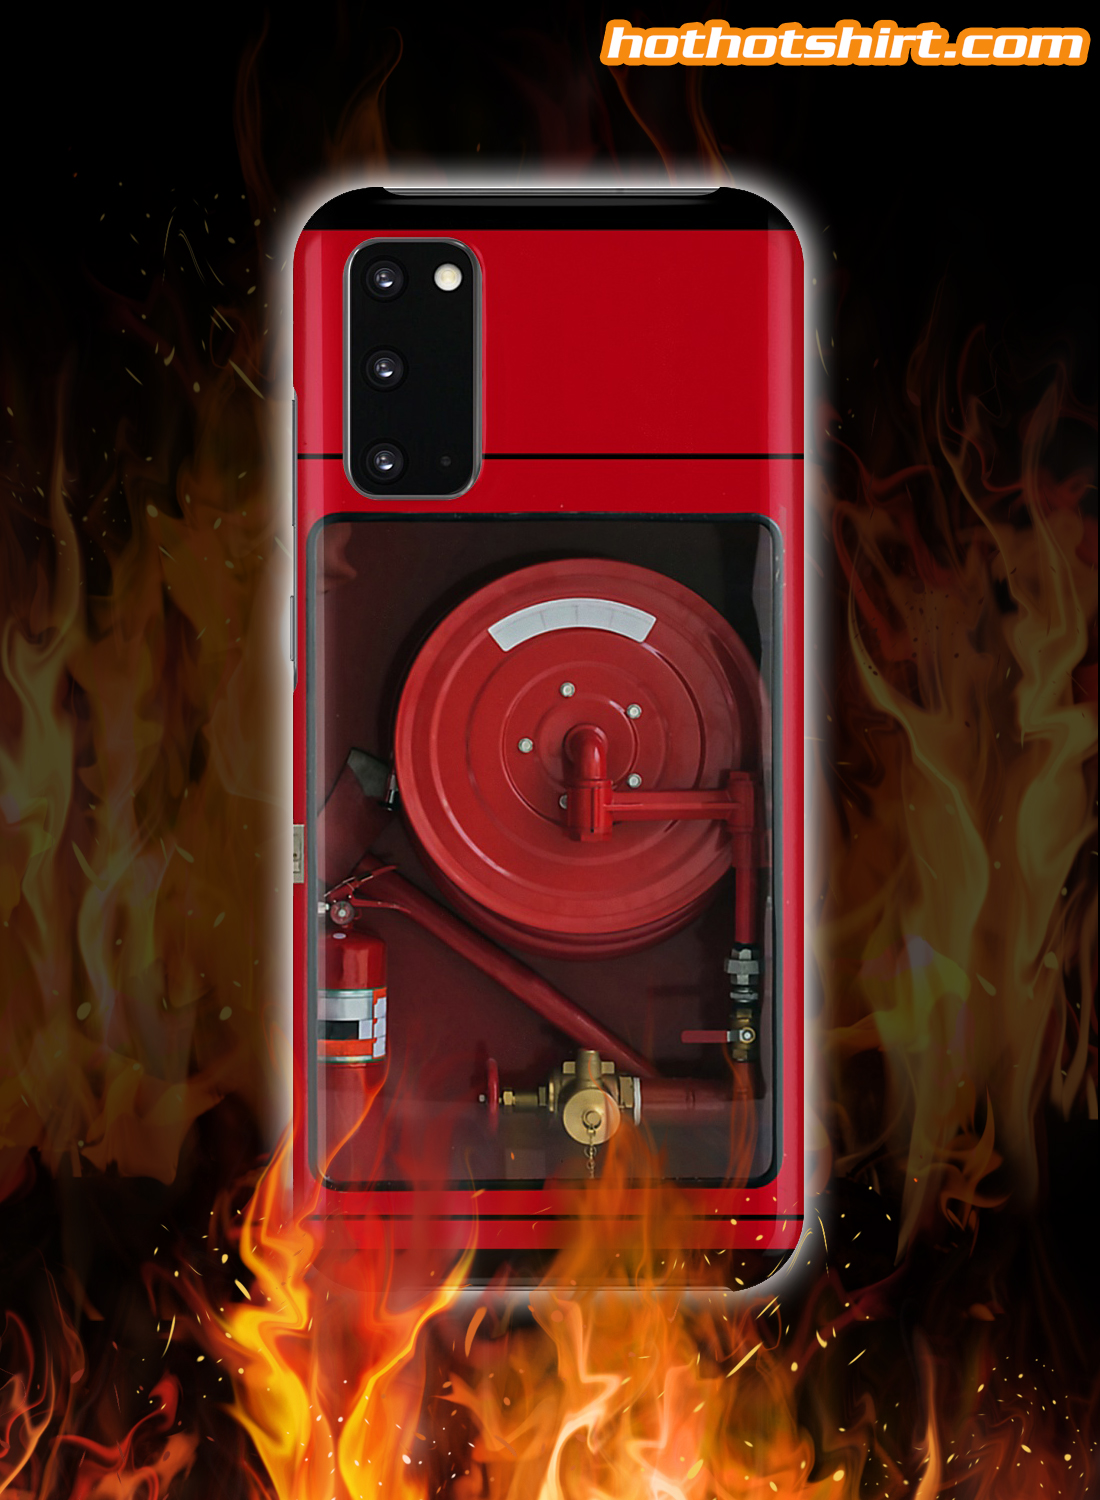 Firefighters hose phone case 3